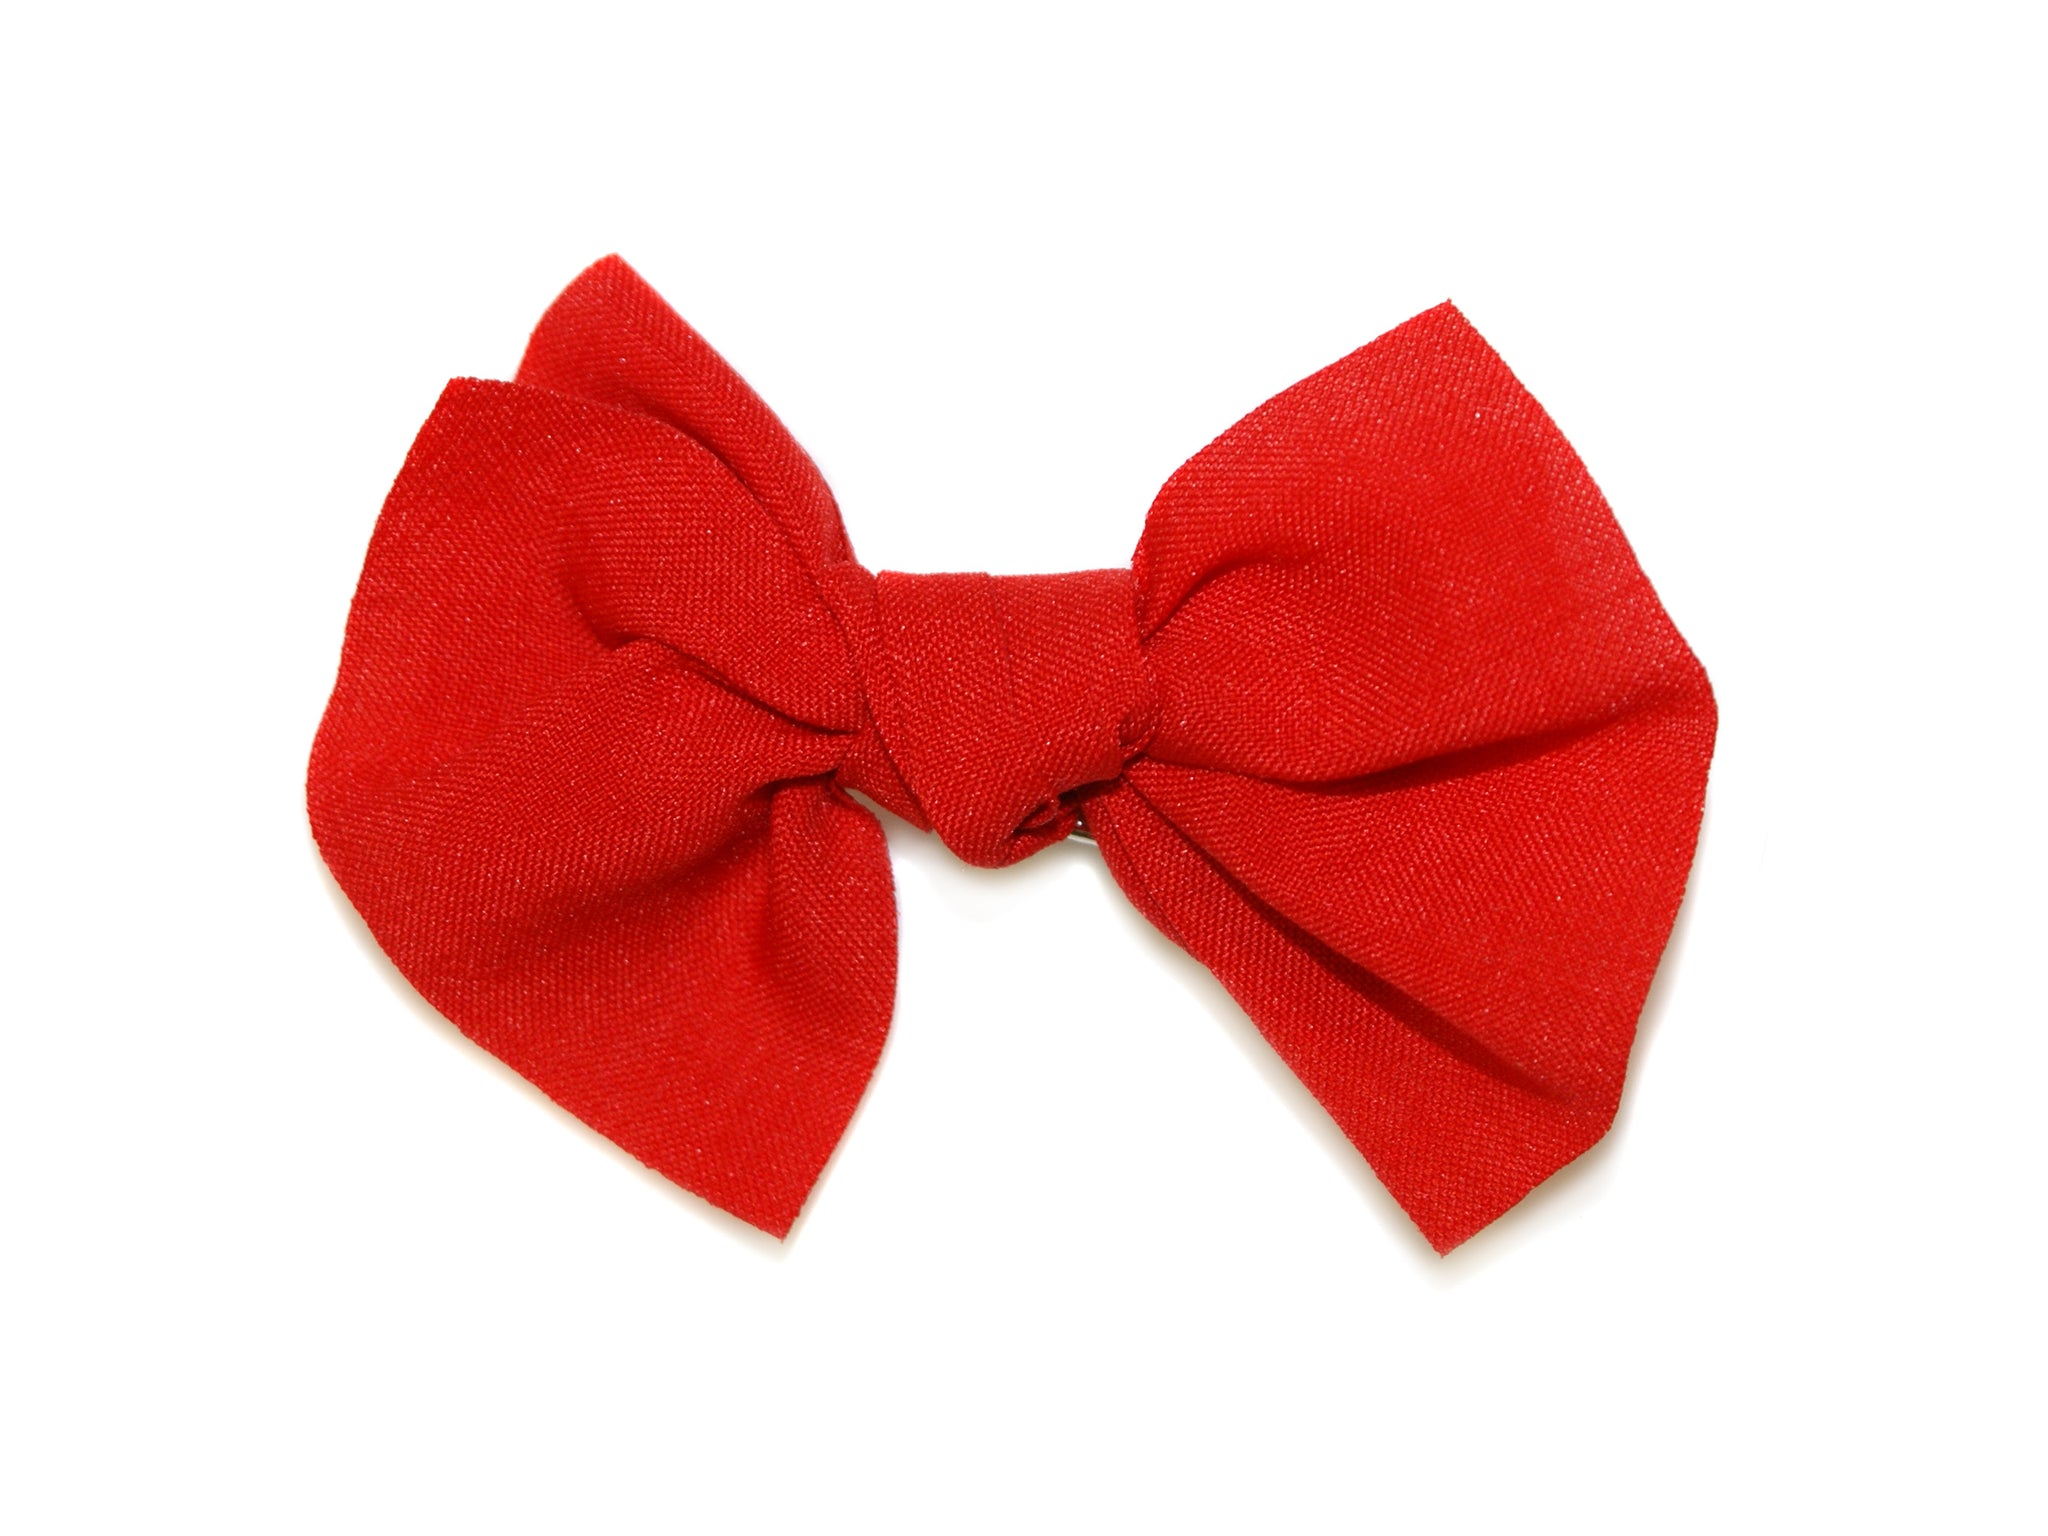 Ragged Small Tie Bow Clip - Red